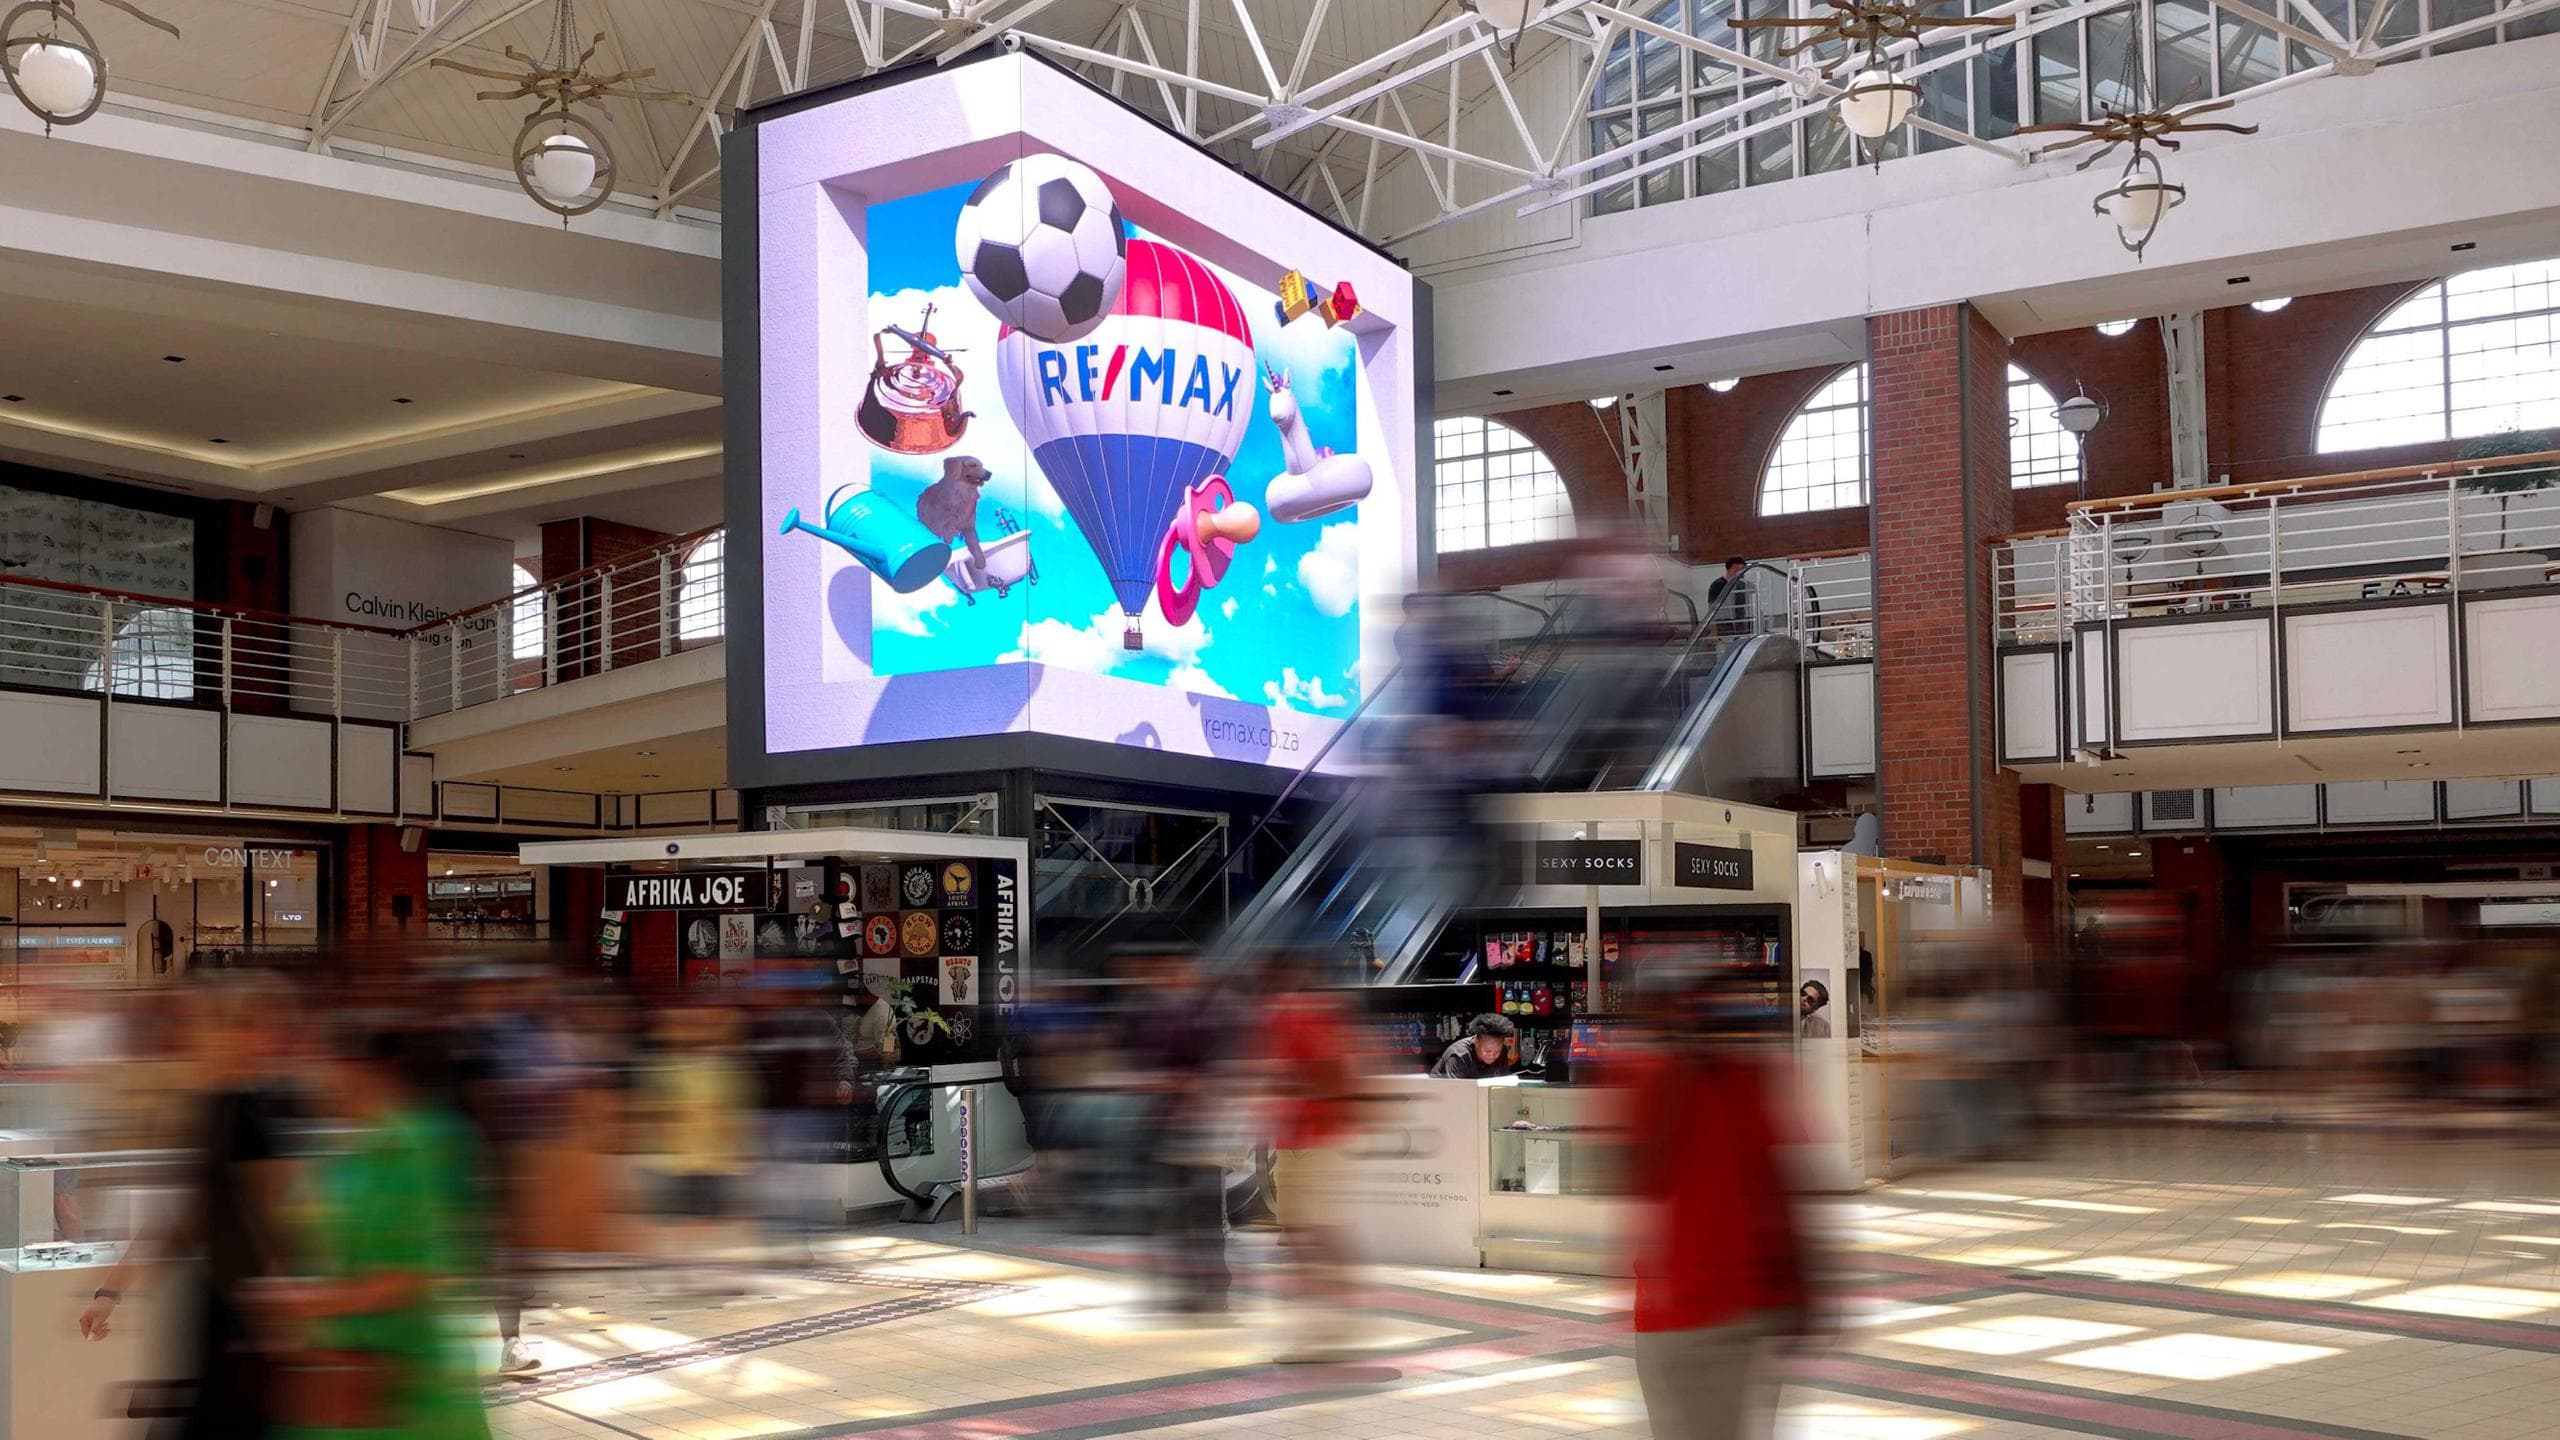 Leveraging the scale, flexibility and creative opportunities of programmatic technology allowed the world-renowned real estate franchisor to bring their vision to life on DOOH screens.